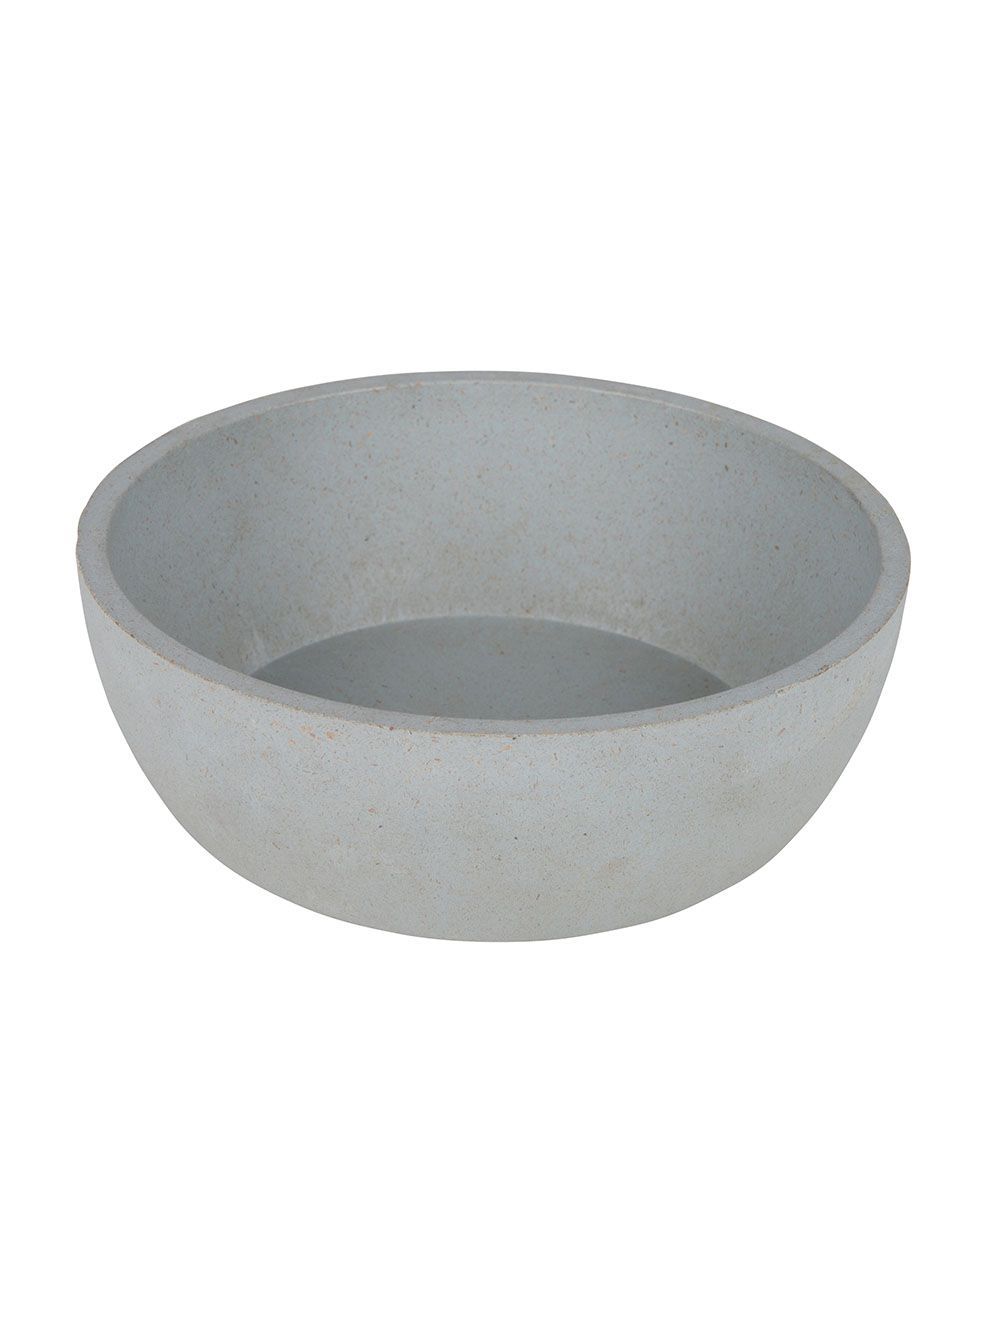 District 70 - Bamboo Bowl Small Ice Blue - (871720261399)